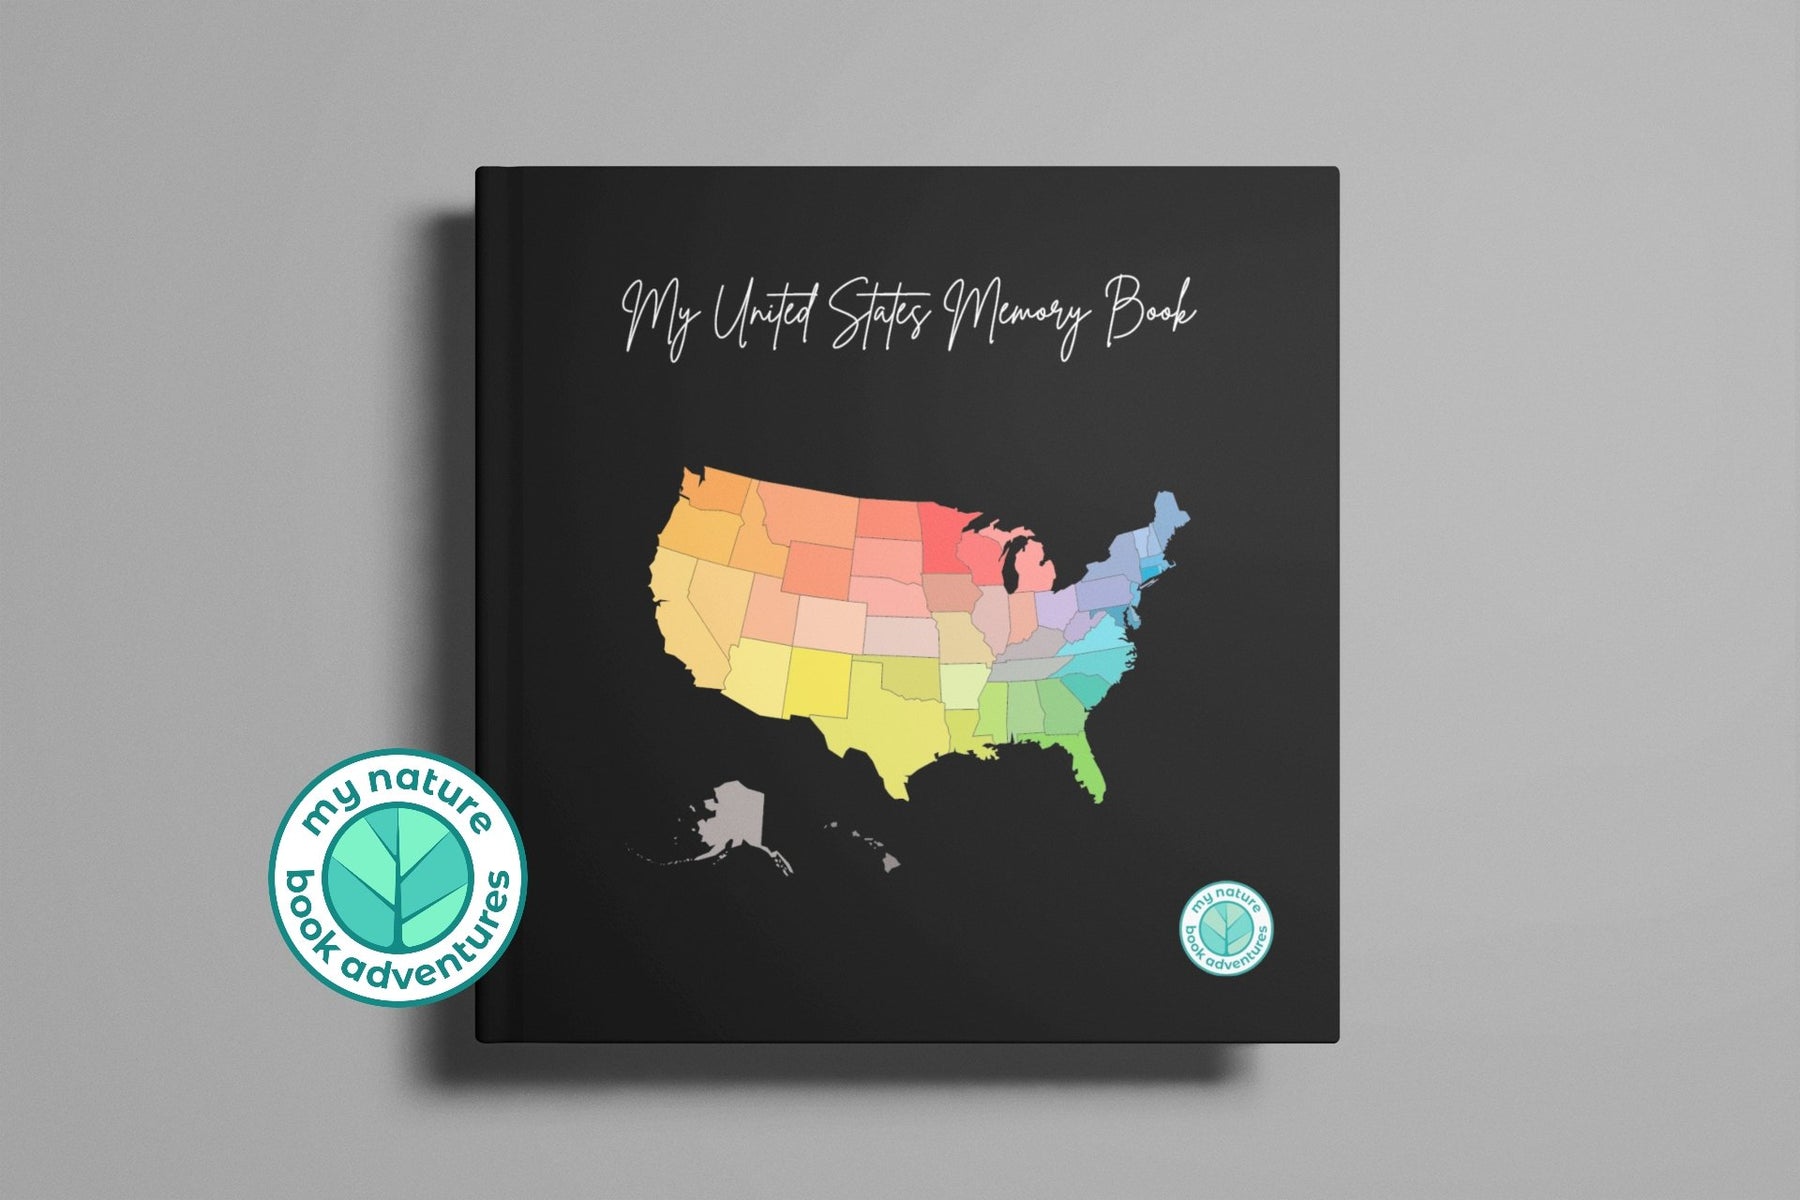 My United States Memory Book – My Nature Book Adventures